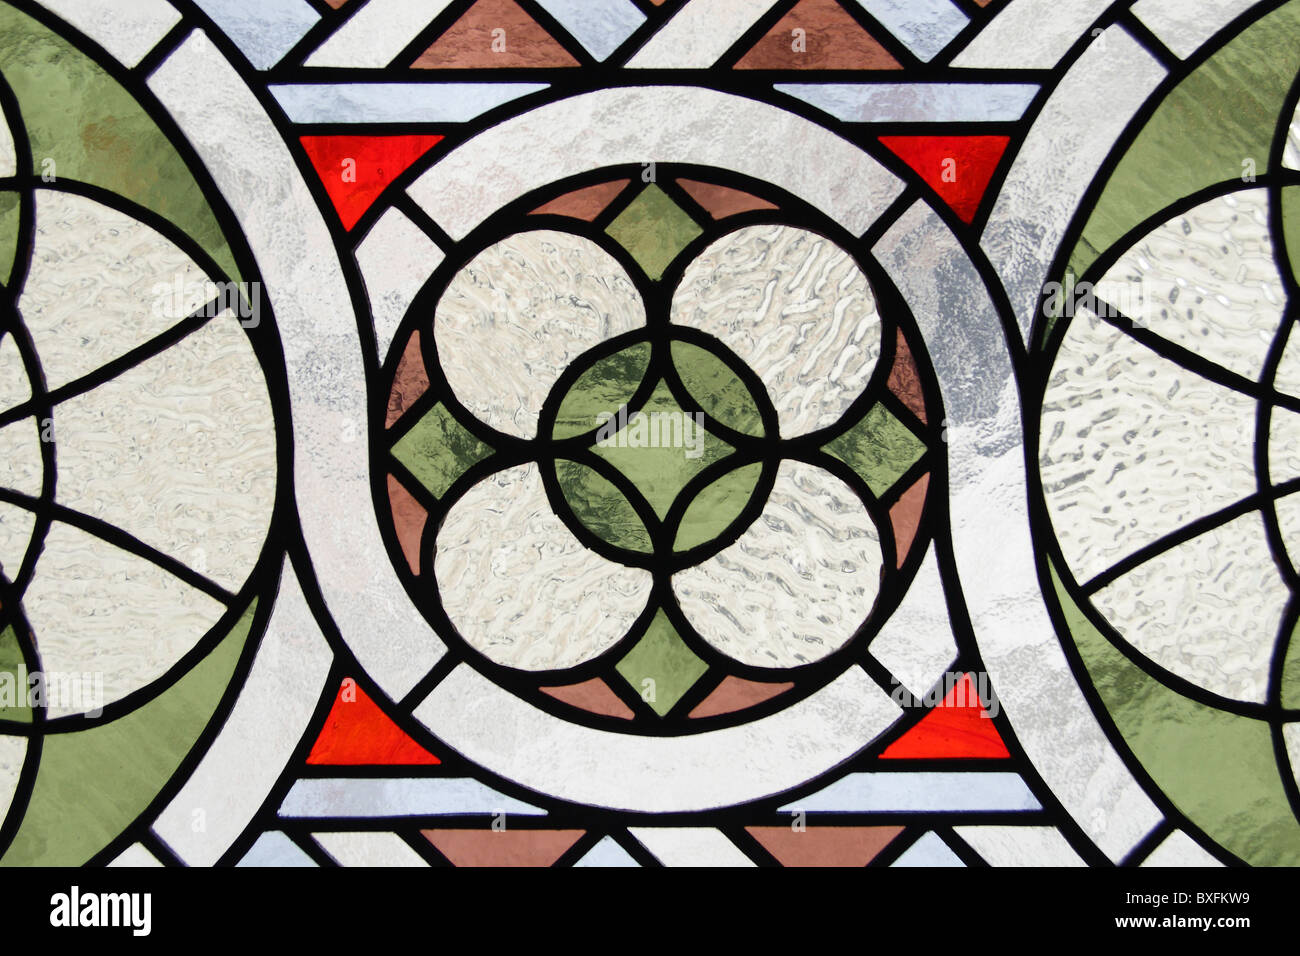 The White Stork Synagogue. Details of stained glass window. Wroclaw, Lower Silesia, Poland. Stock Photo